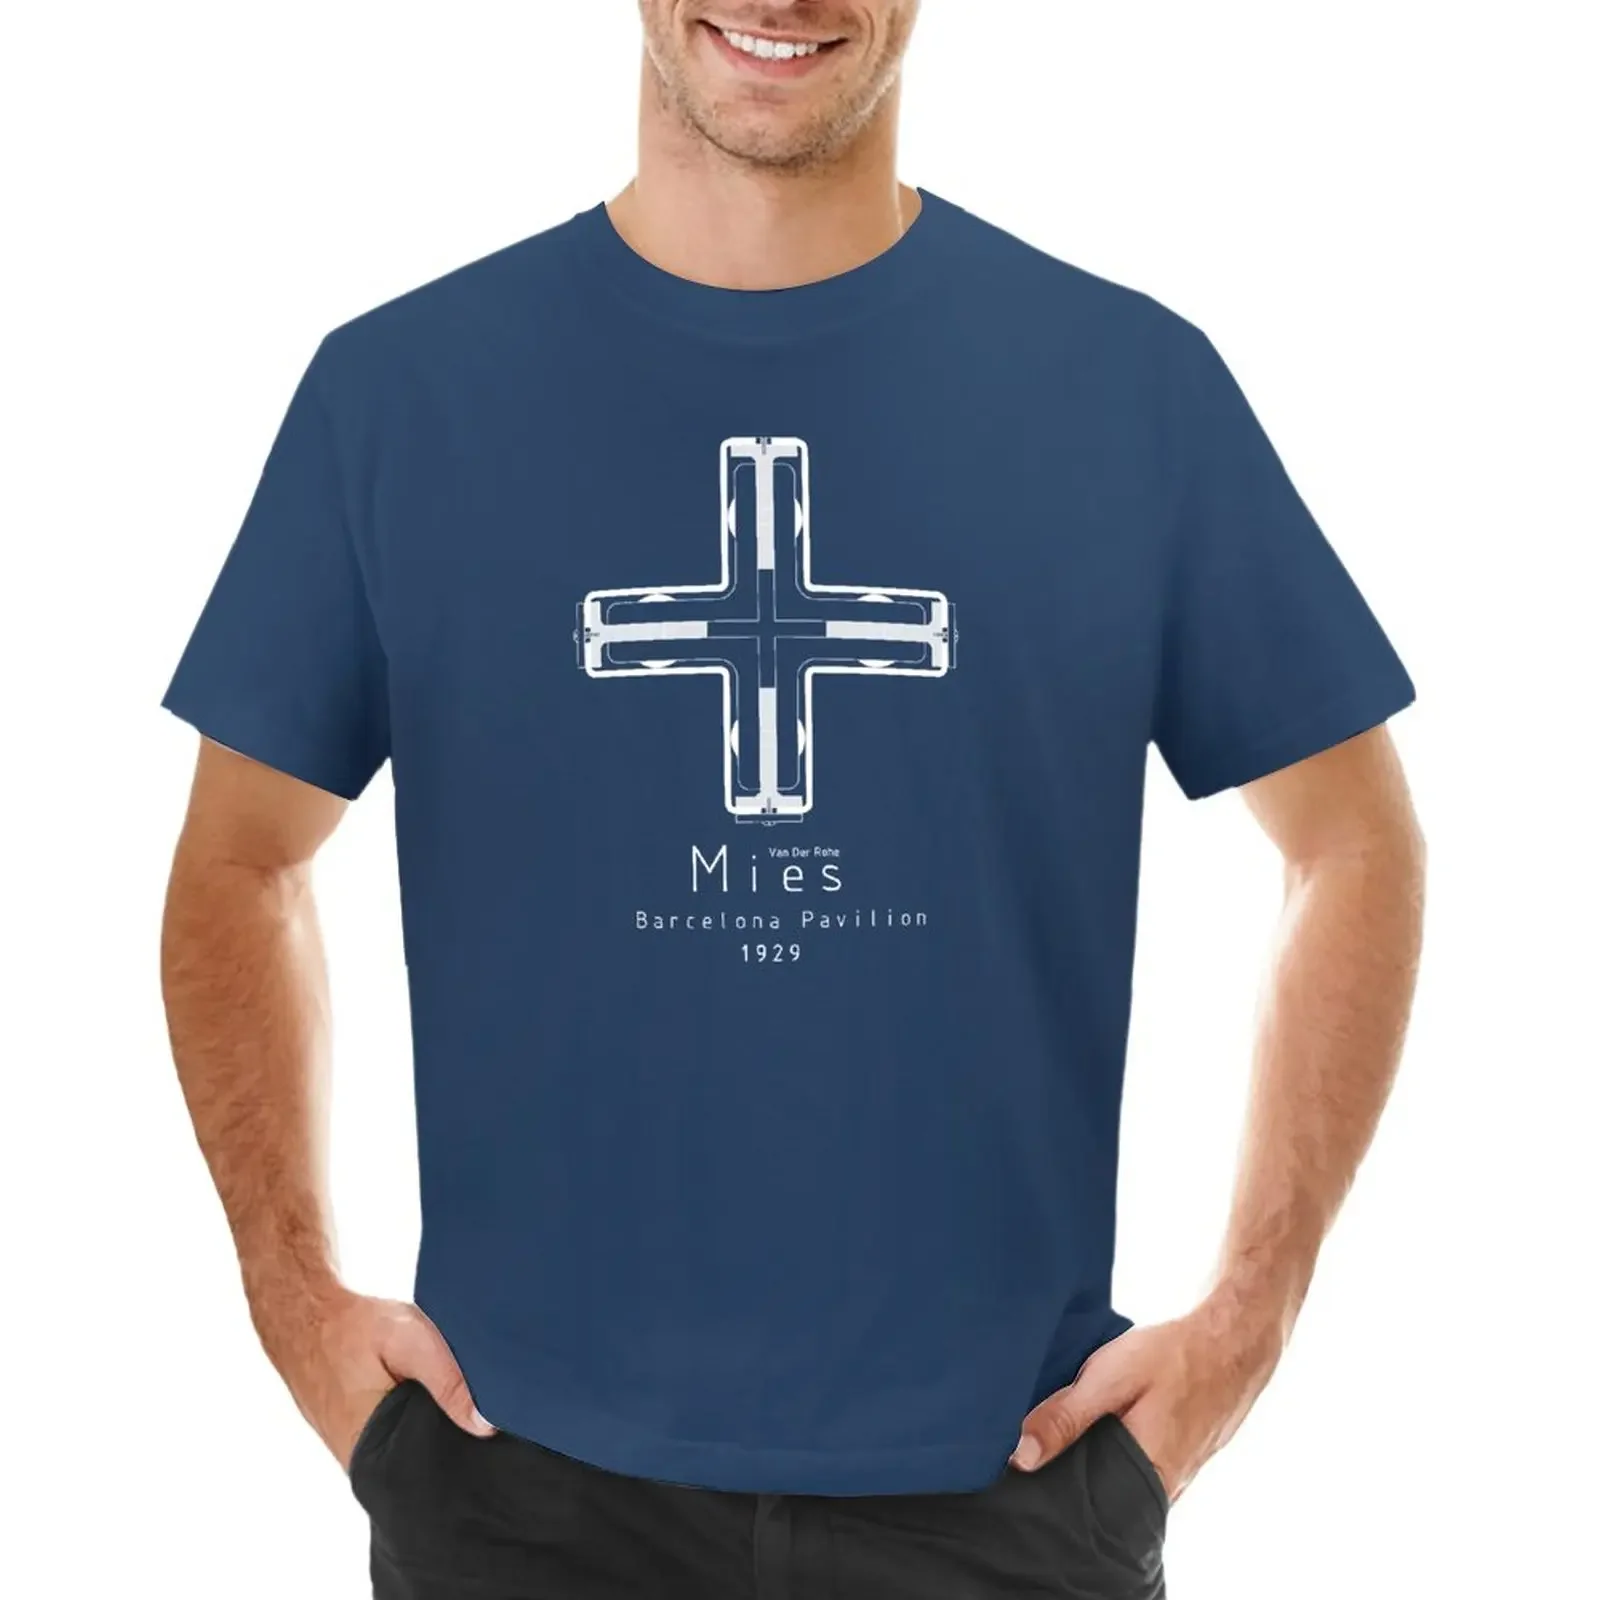 ICONIC ARCHITECTS-MIES VAN DER ROHE T-Shirt Aesthetic clothing plus sizes men clothes